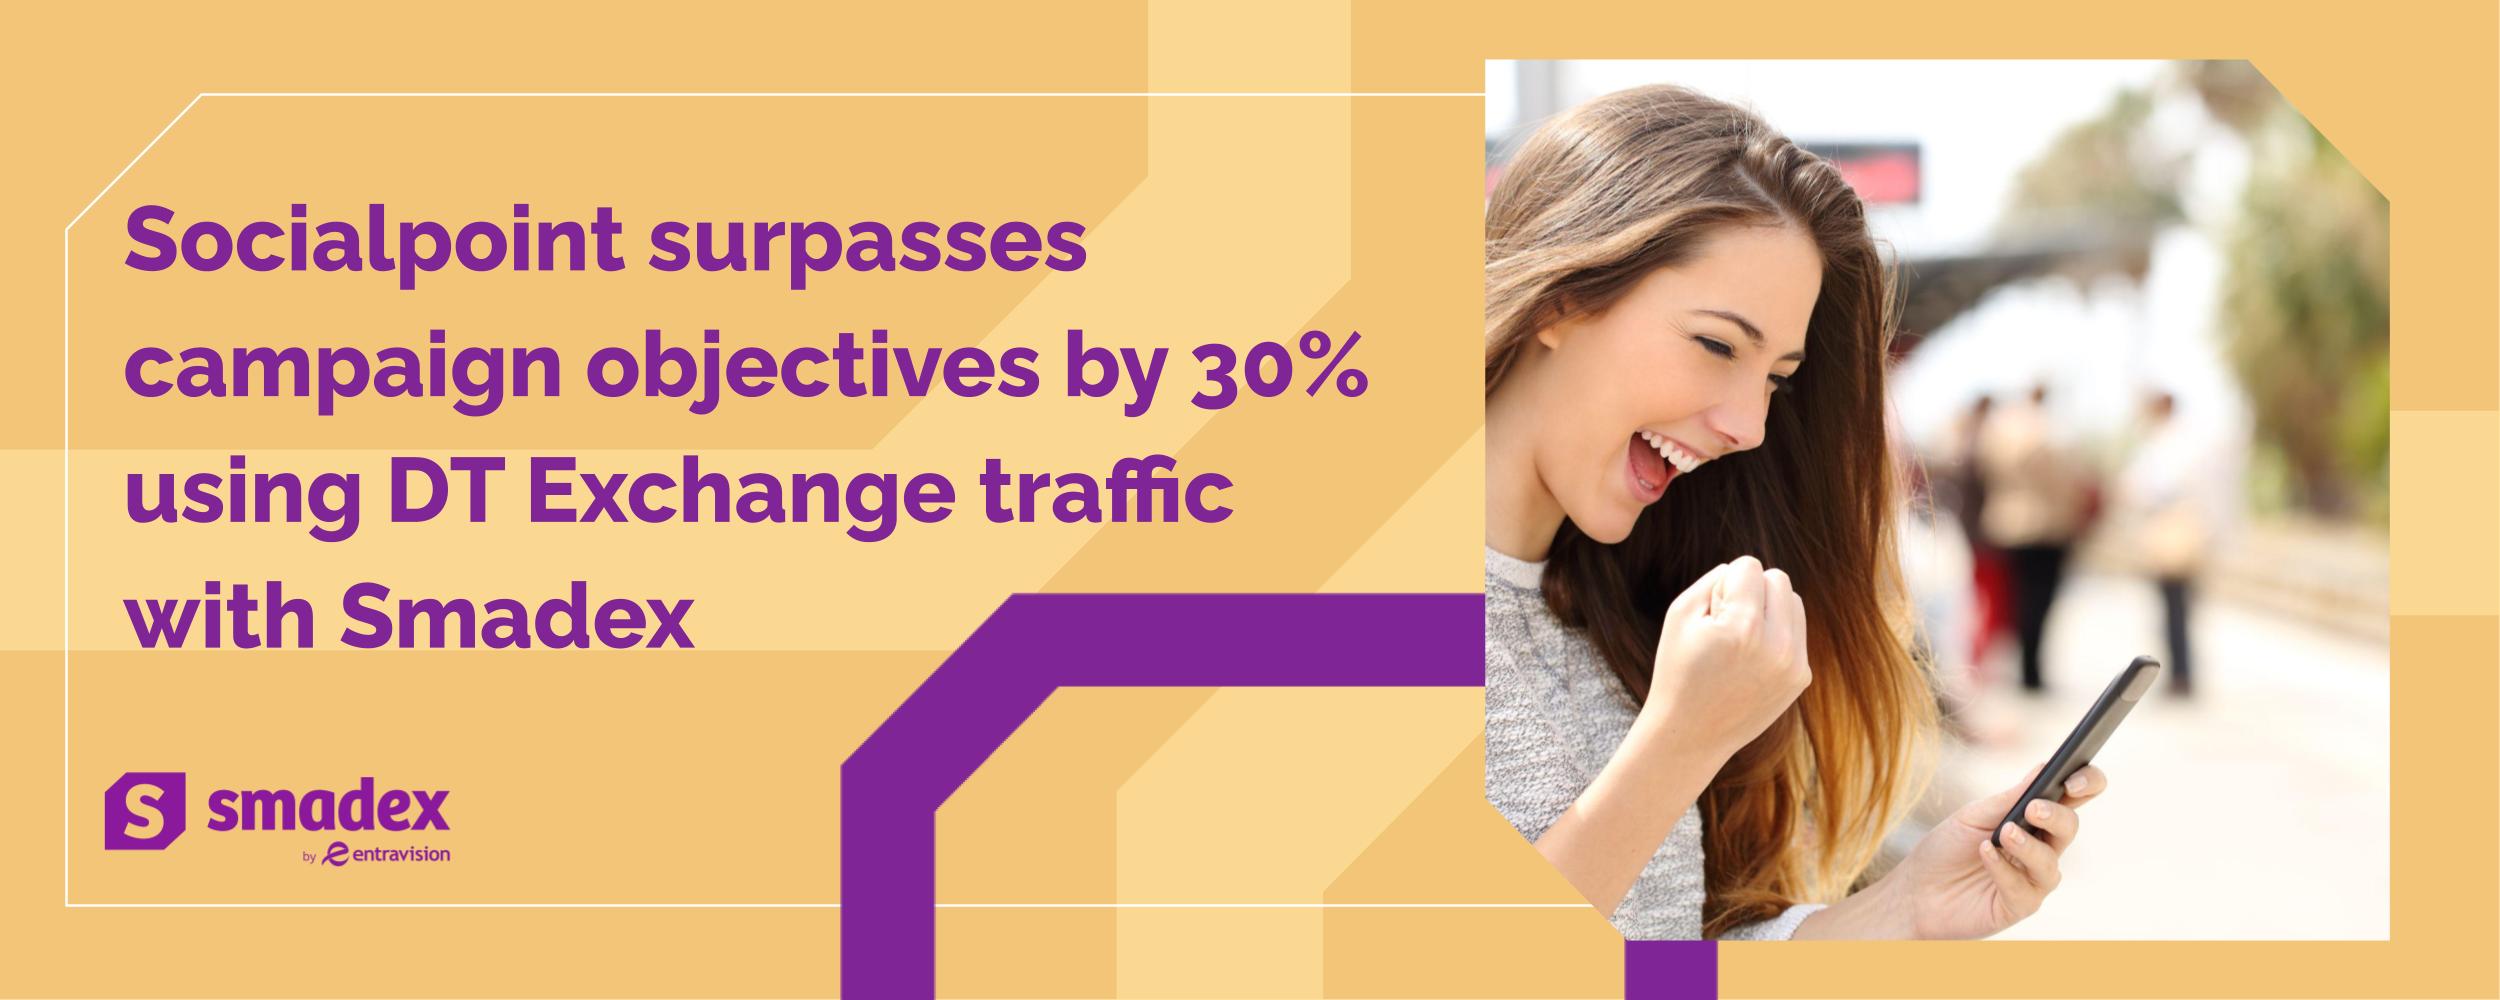 Socialpoint surpasses campaign objectives by 30% using DT Exchange traffic with Smadex